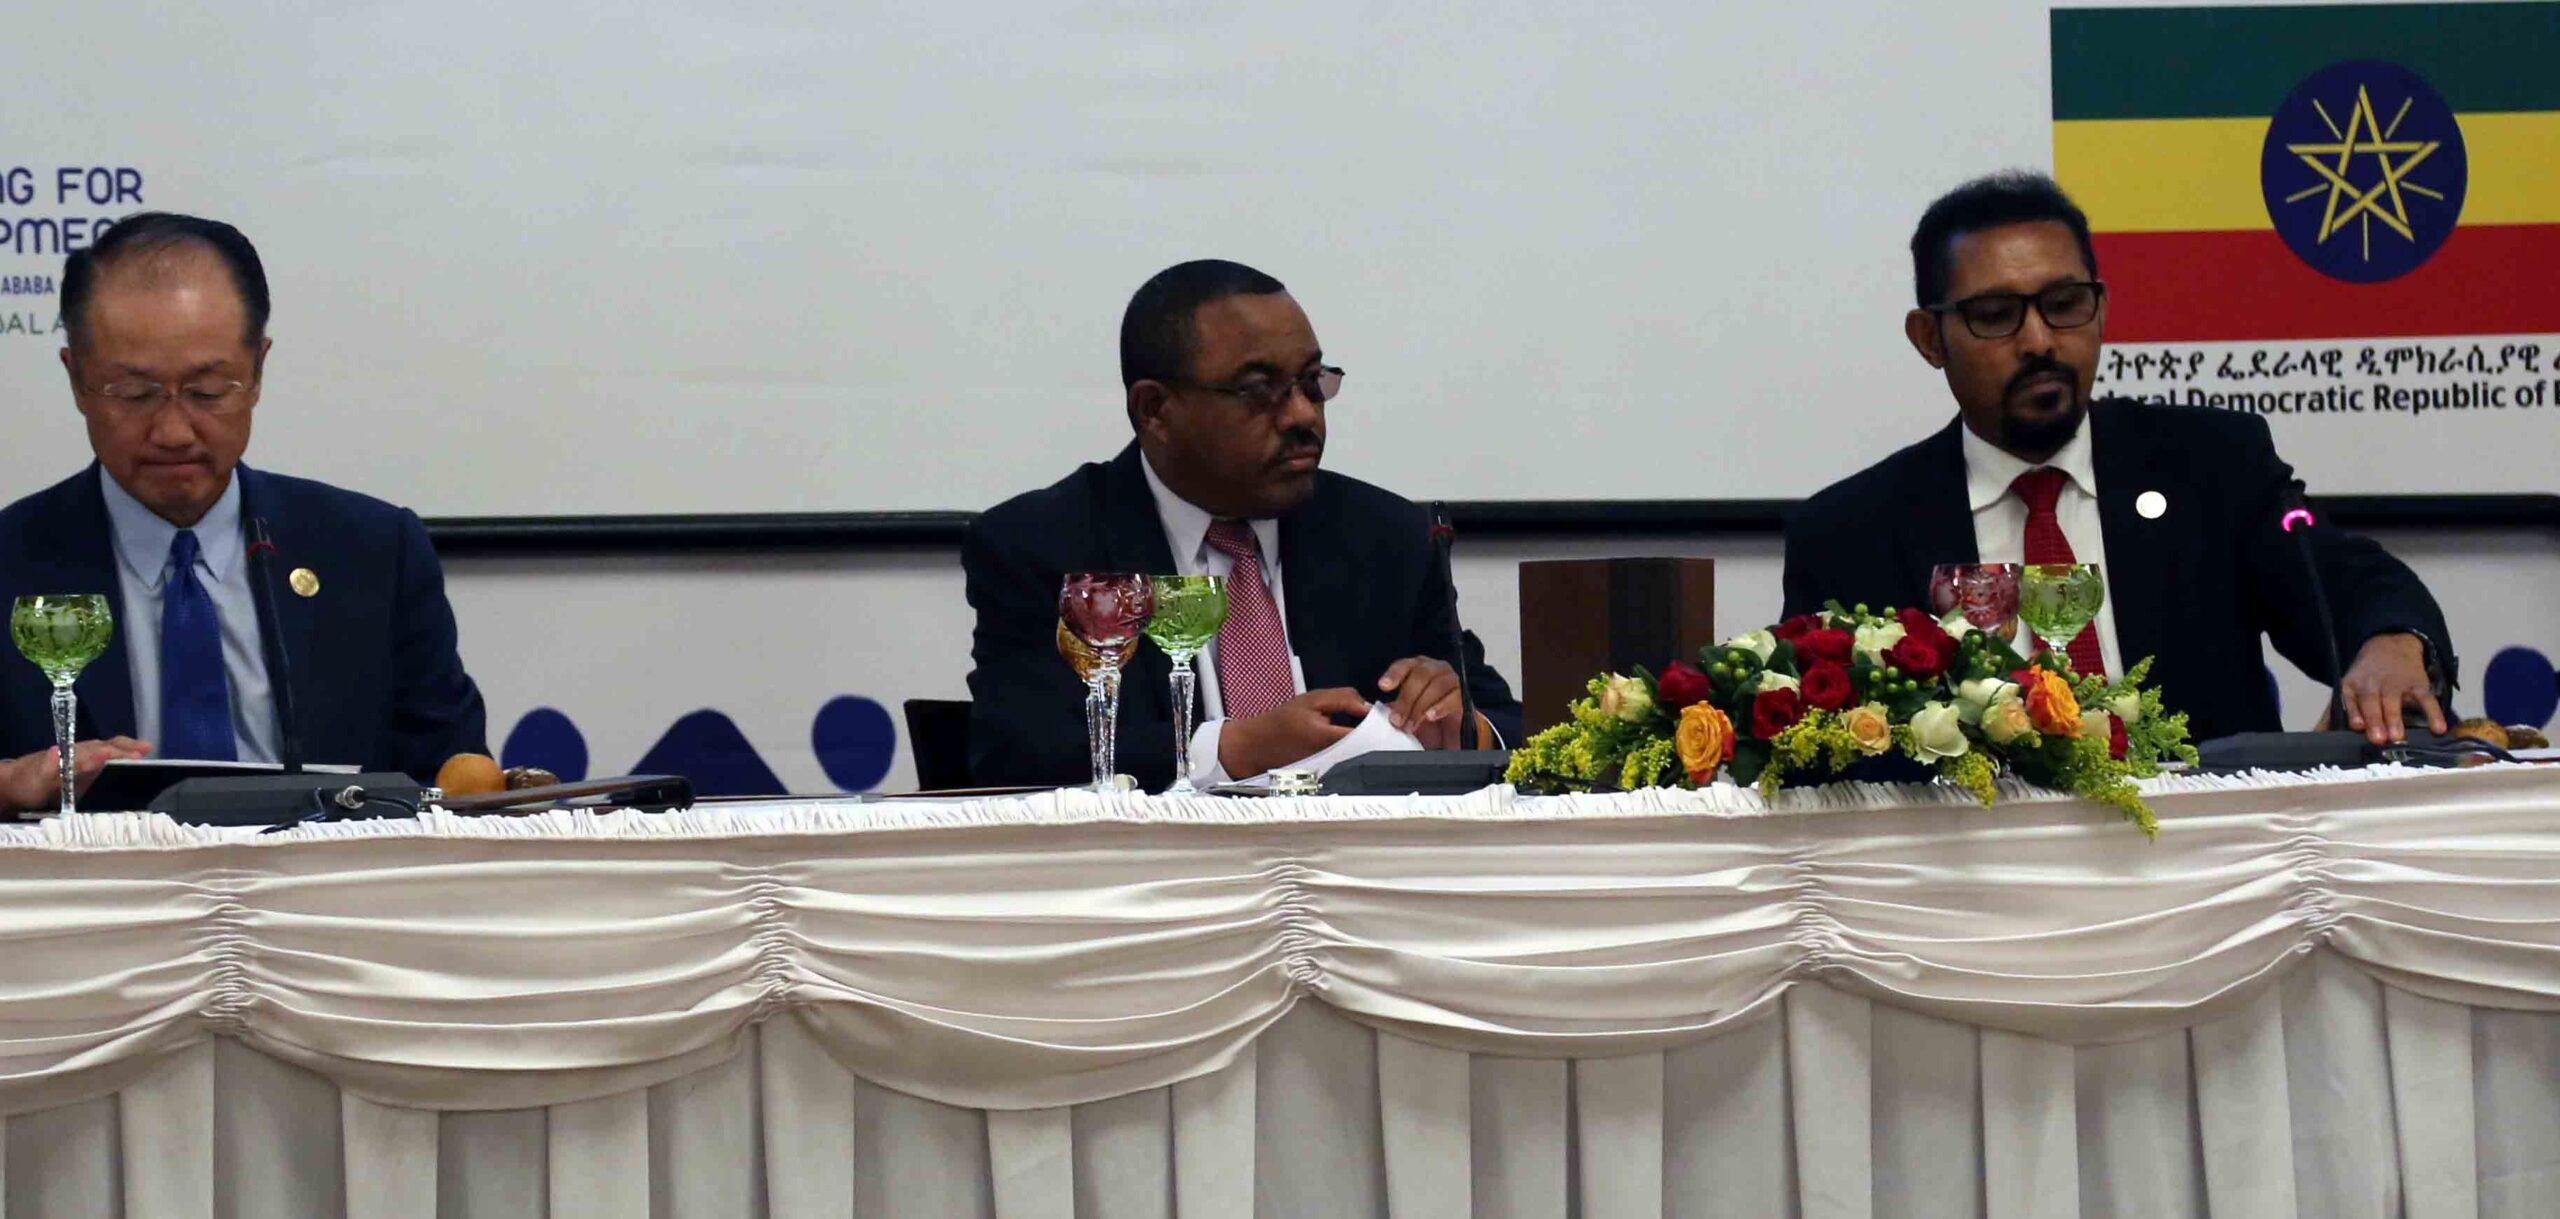 “Ethiopia Rising”: High level event held in Addis Ababa